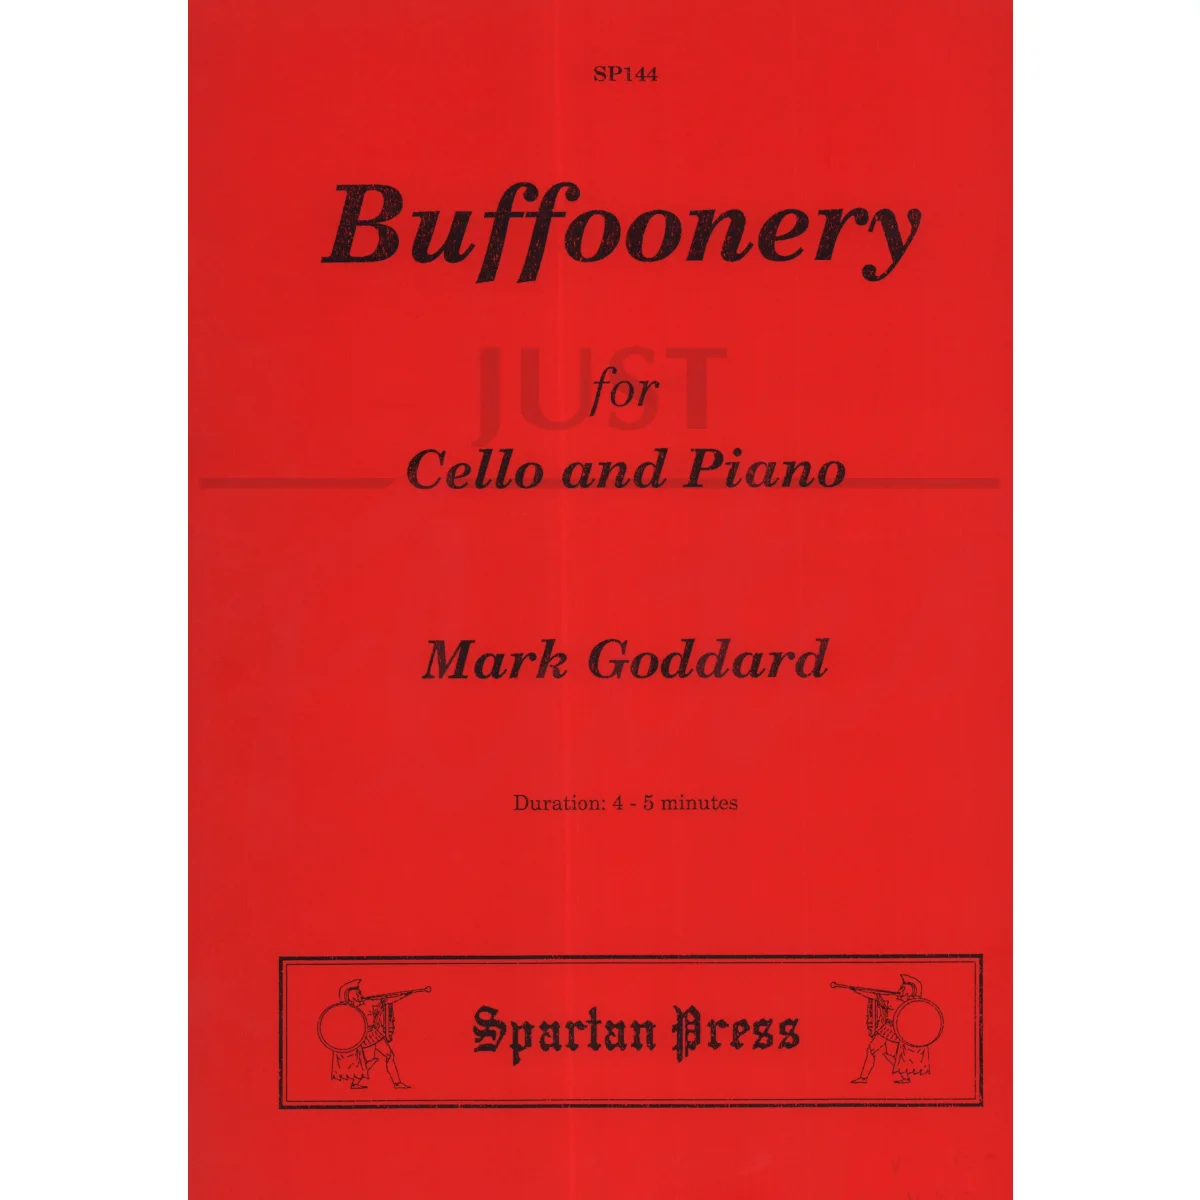 Buffoonery for Cello and Piano